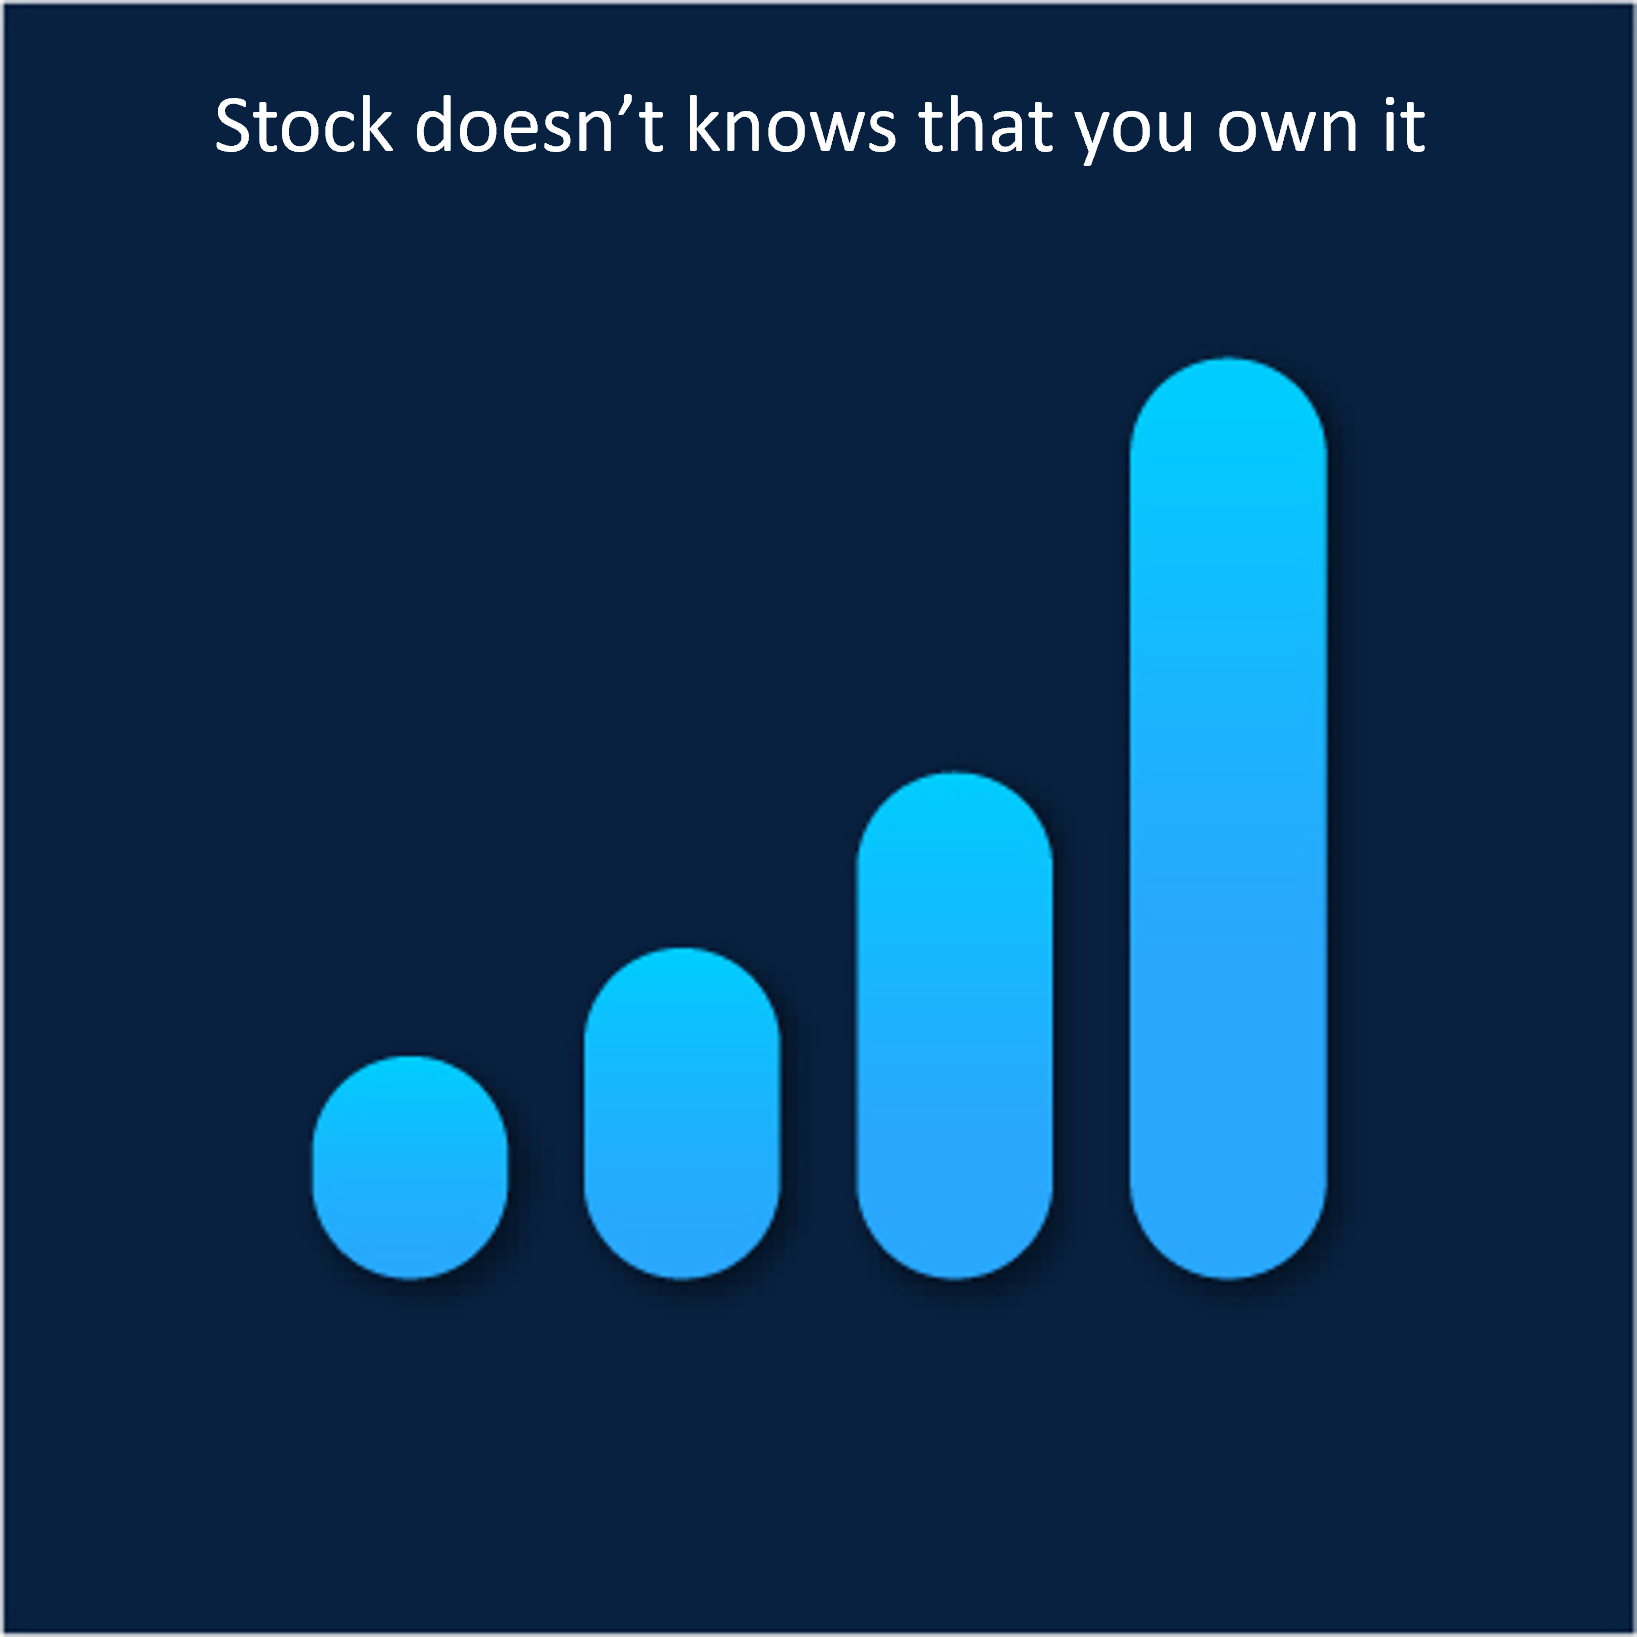 Stock doesn't knows that you own it